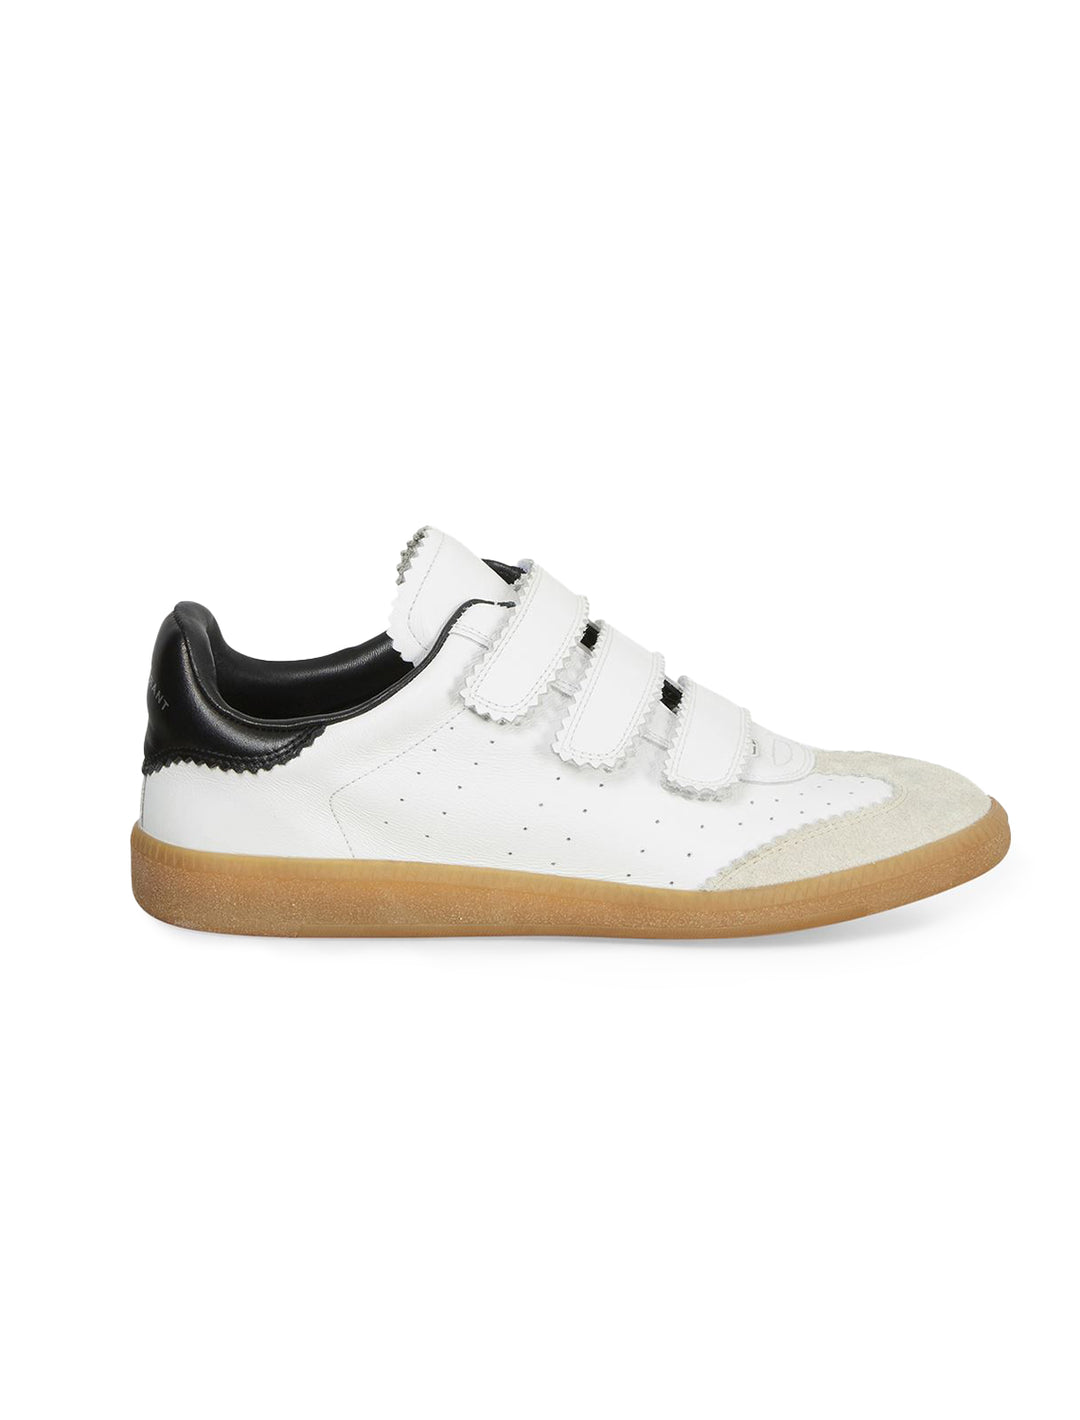 Side view of Isabel Marant Etoile's Beth Sneaker in White.